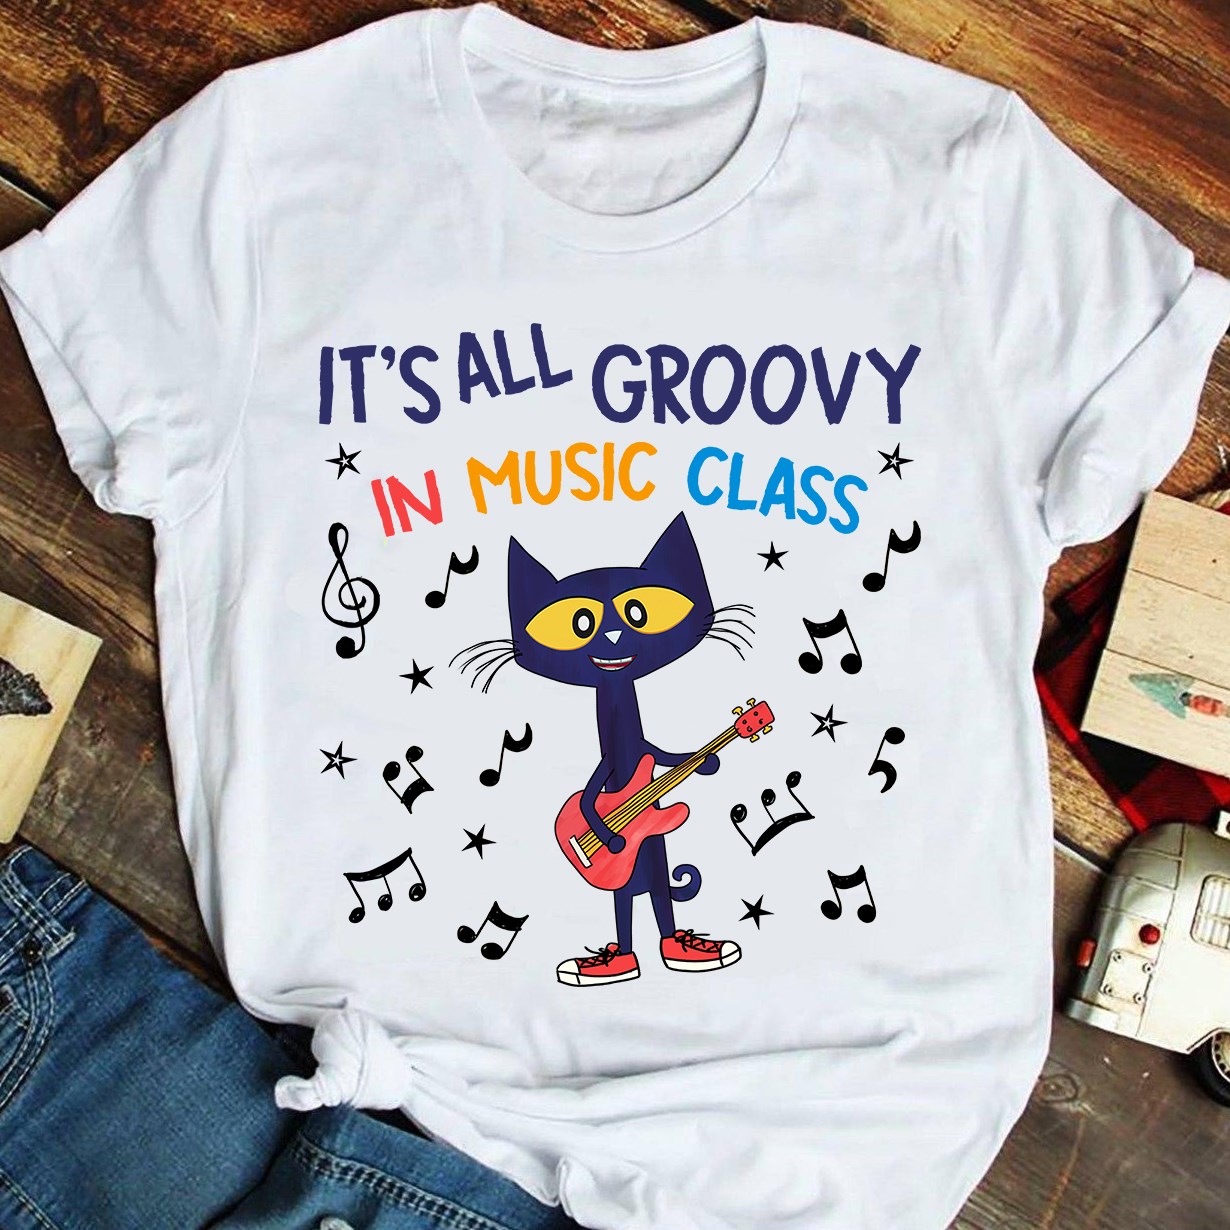 It's all groovy in music class - Cat and music